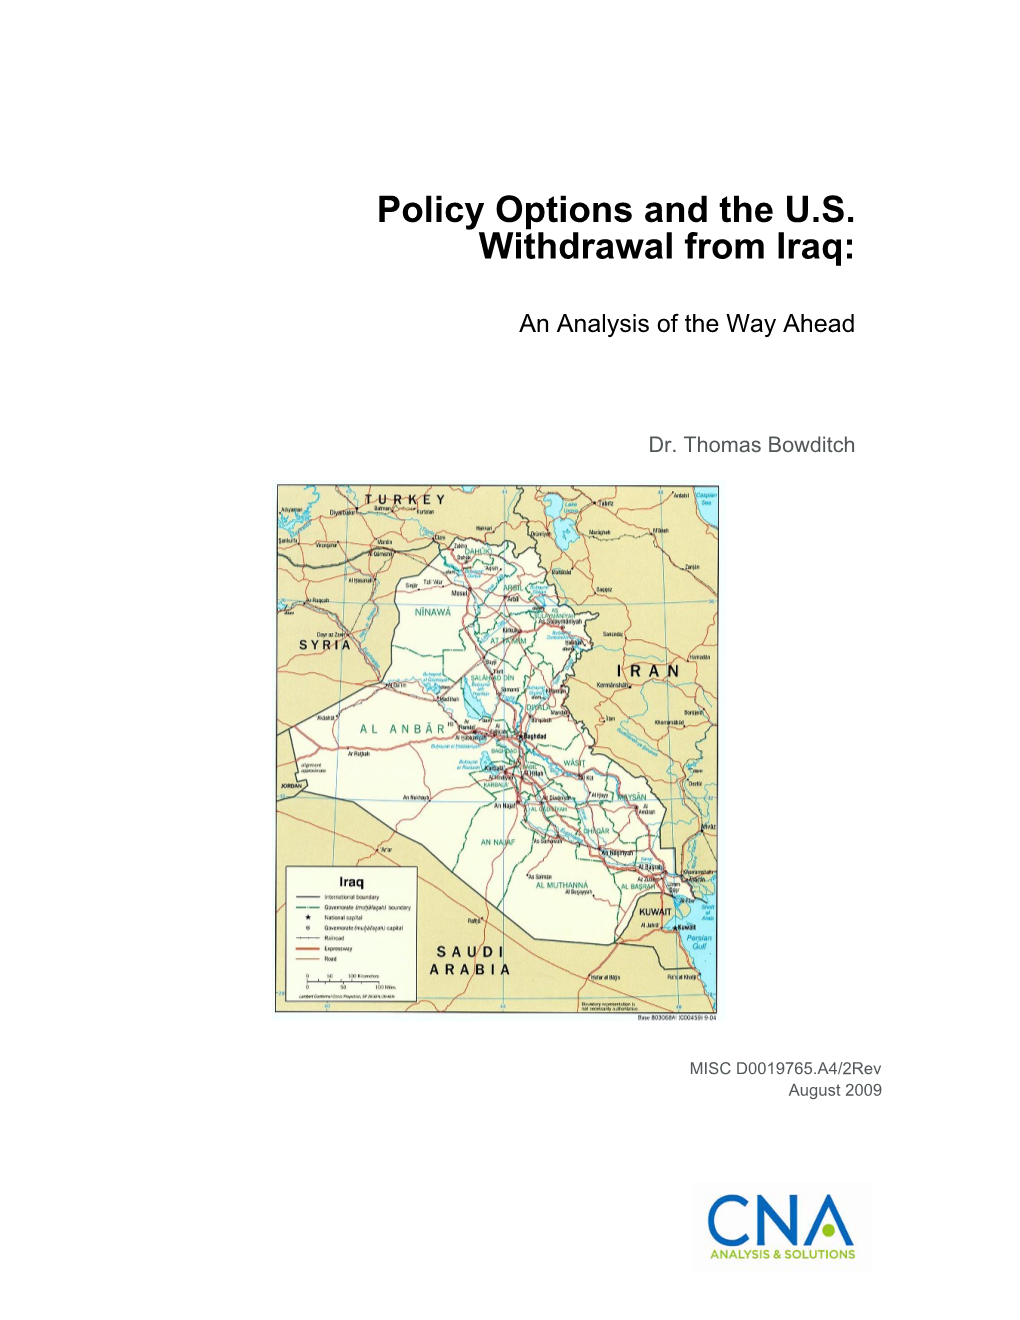 Policy Options and the U.S. Withdrawal from Iraq